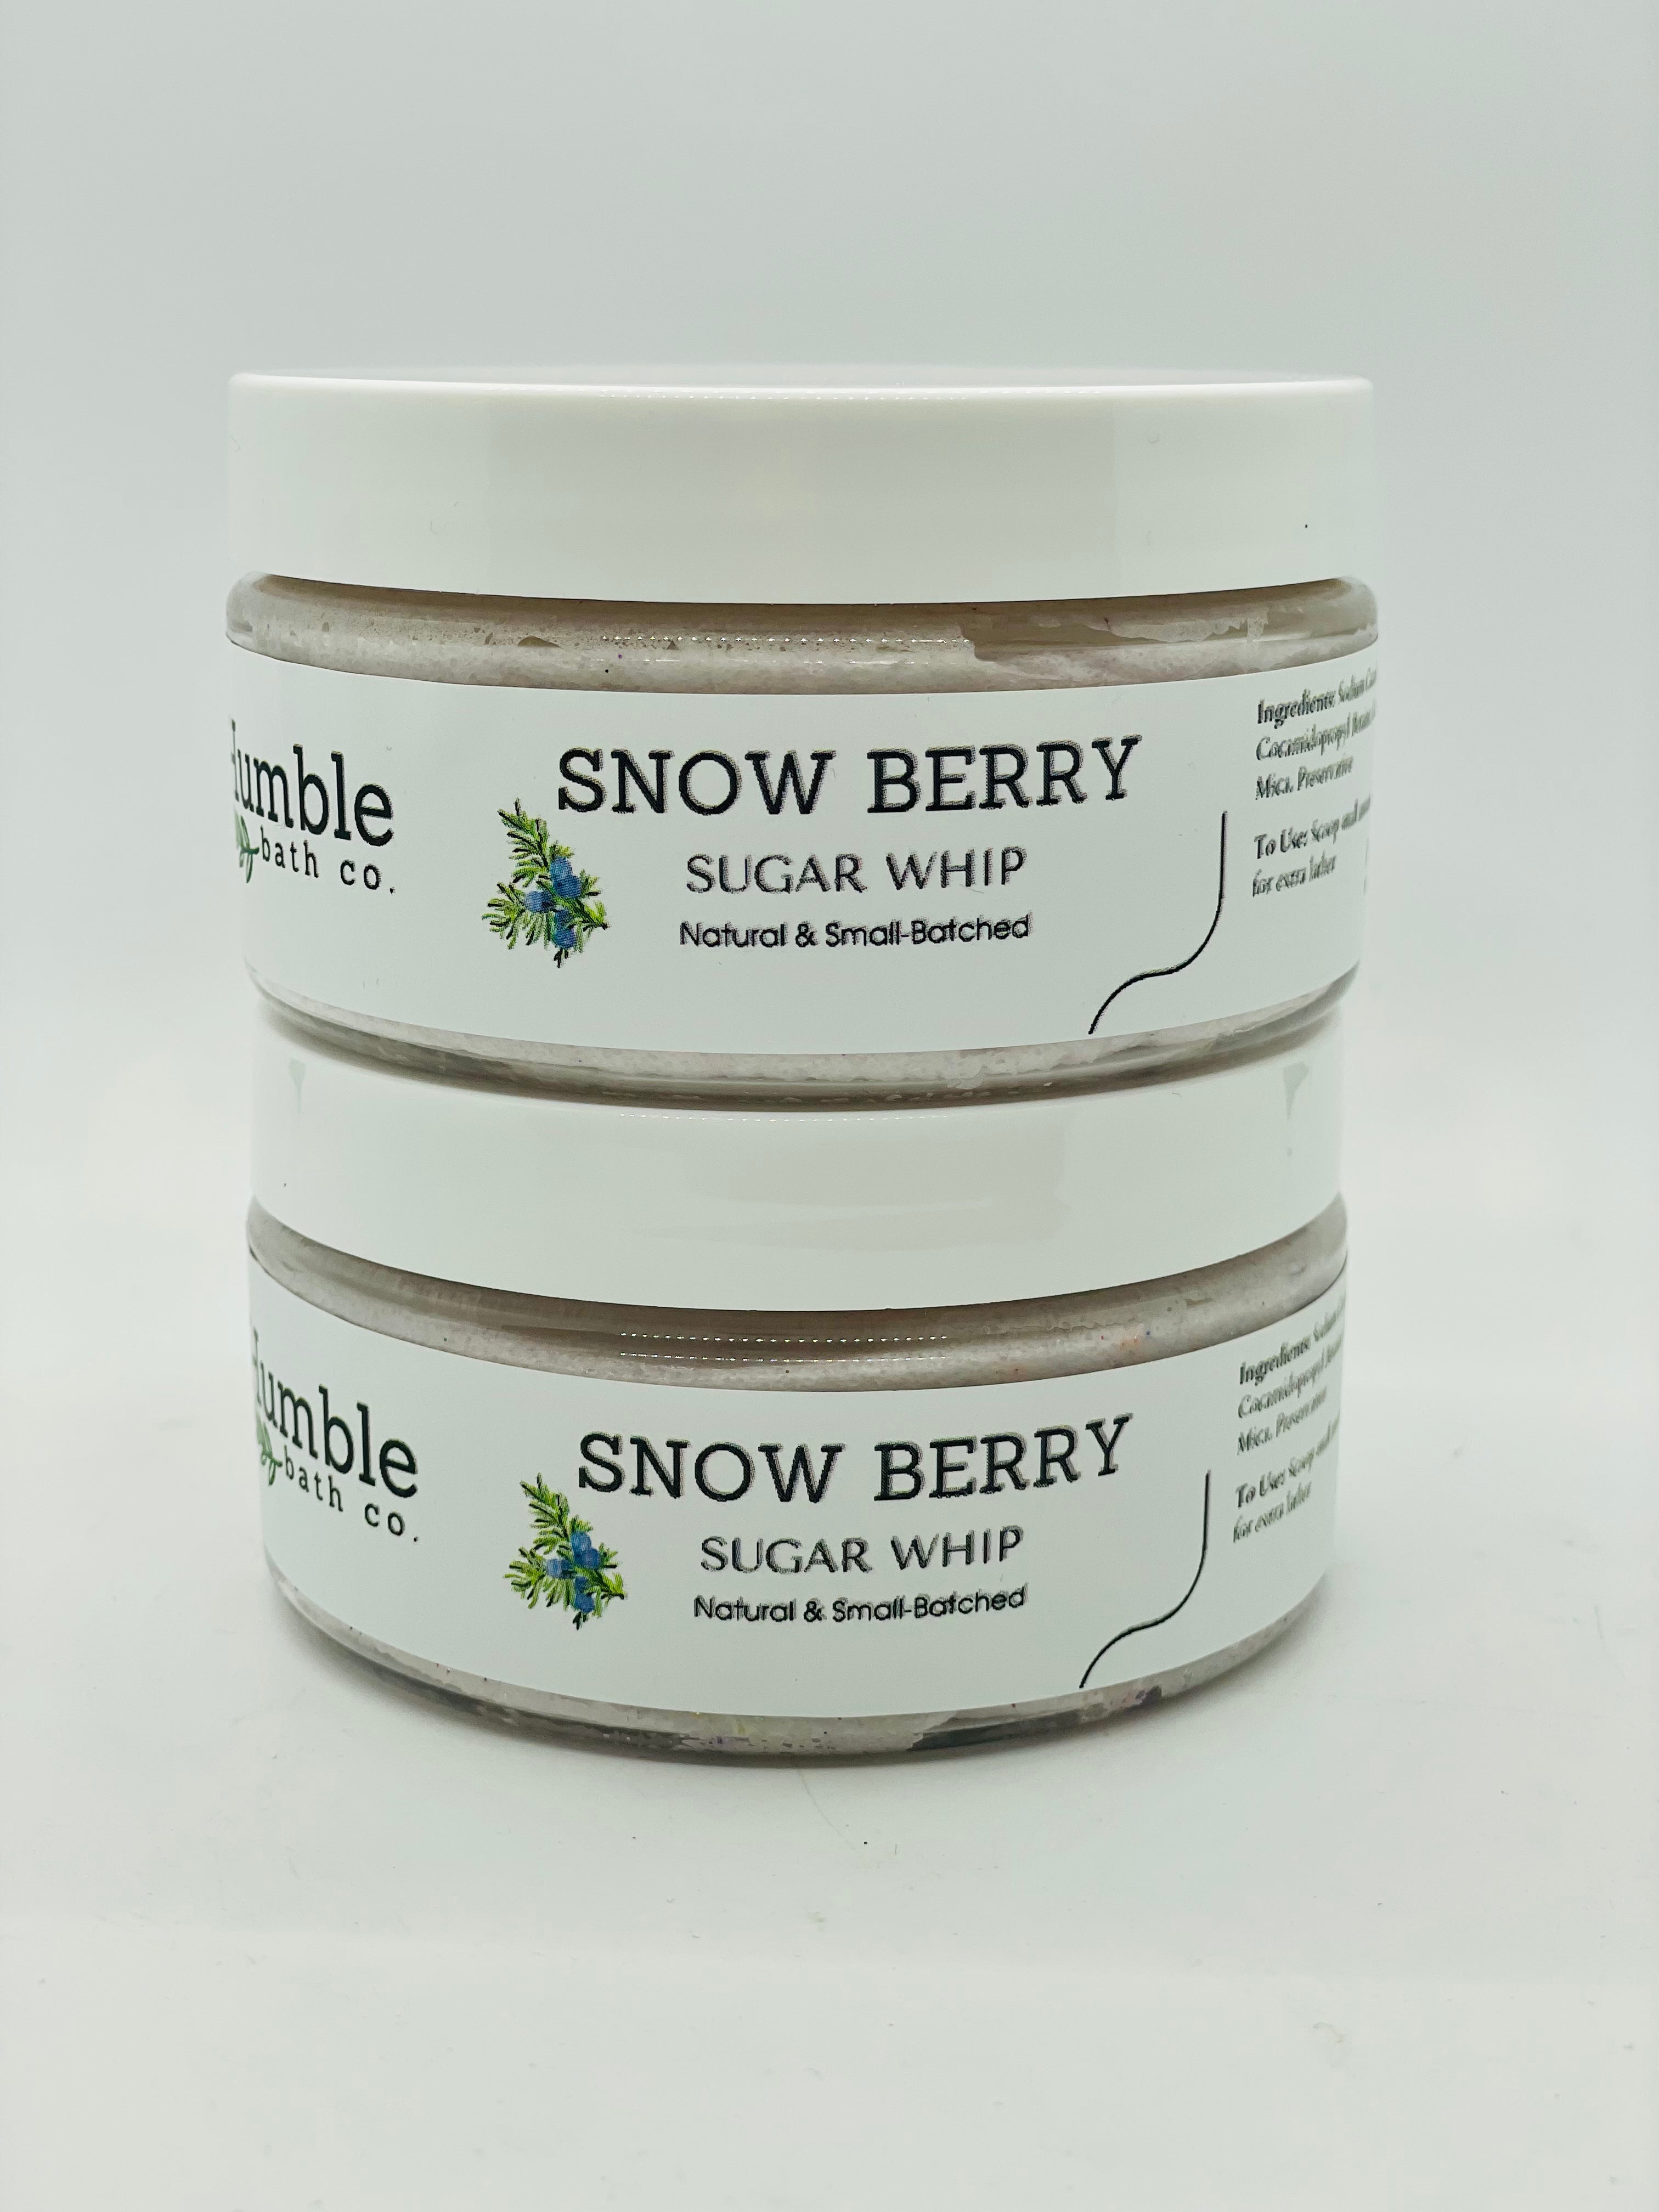 Snow Berry Sugar Whipped Soap